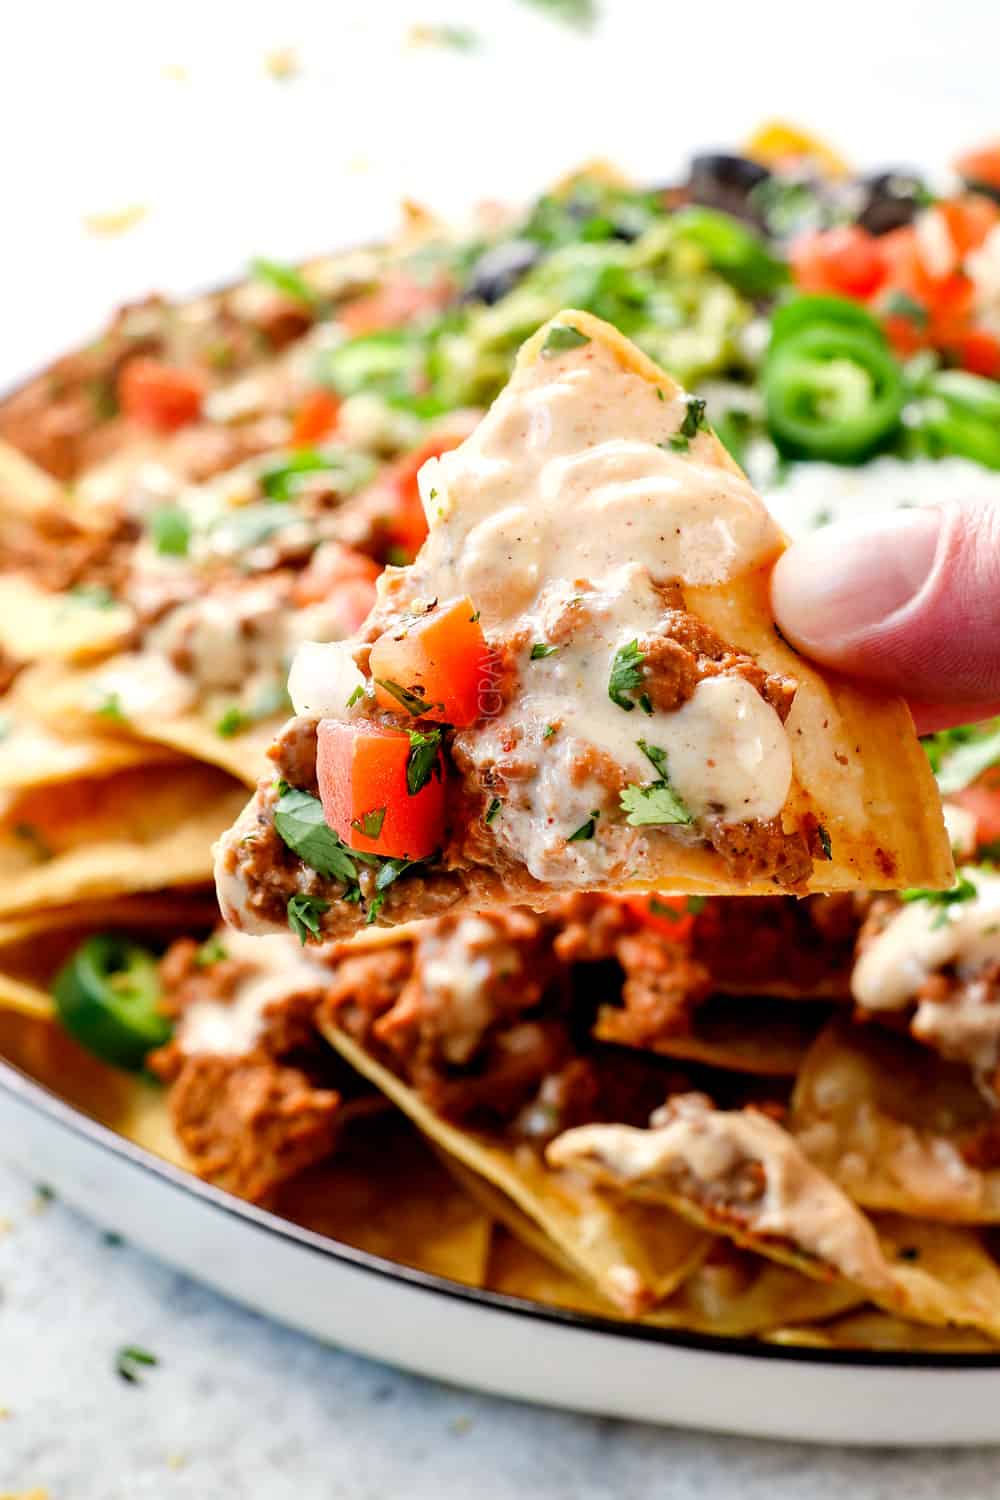 a hand picking up loaded nacho recipe with ground beef, cheese sauce and pico de gallo on the chip